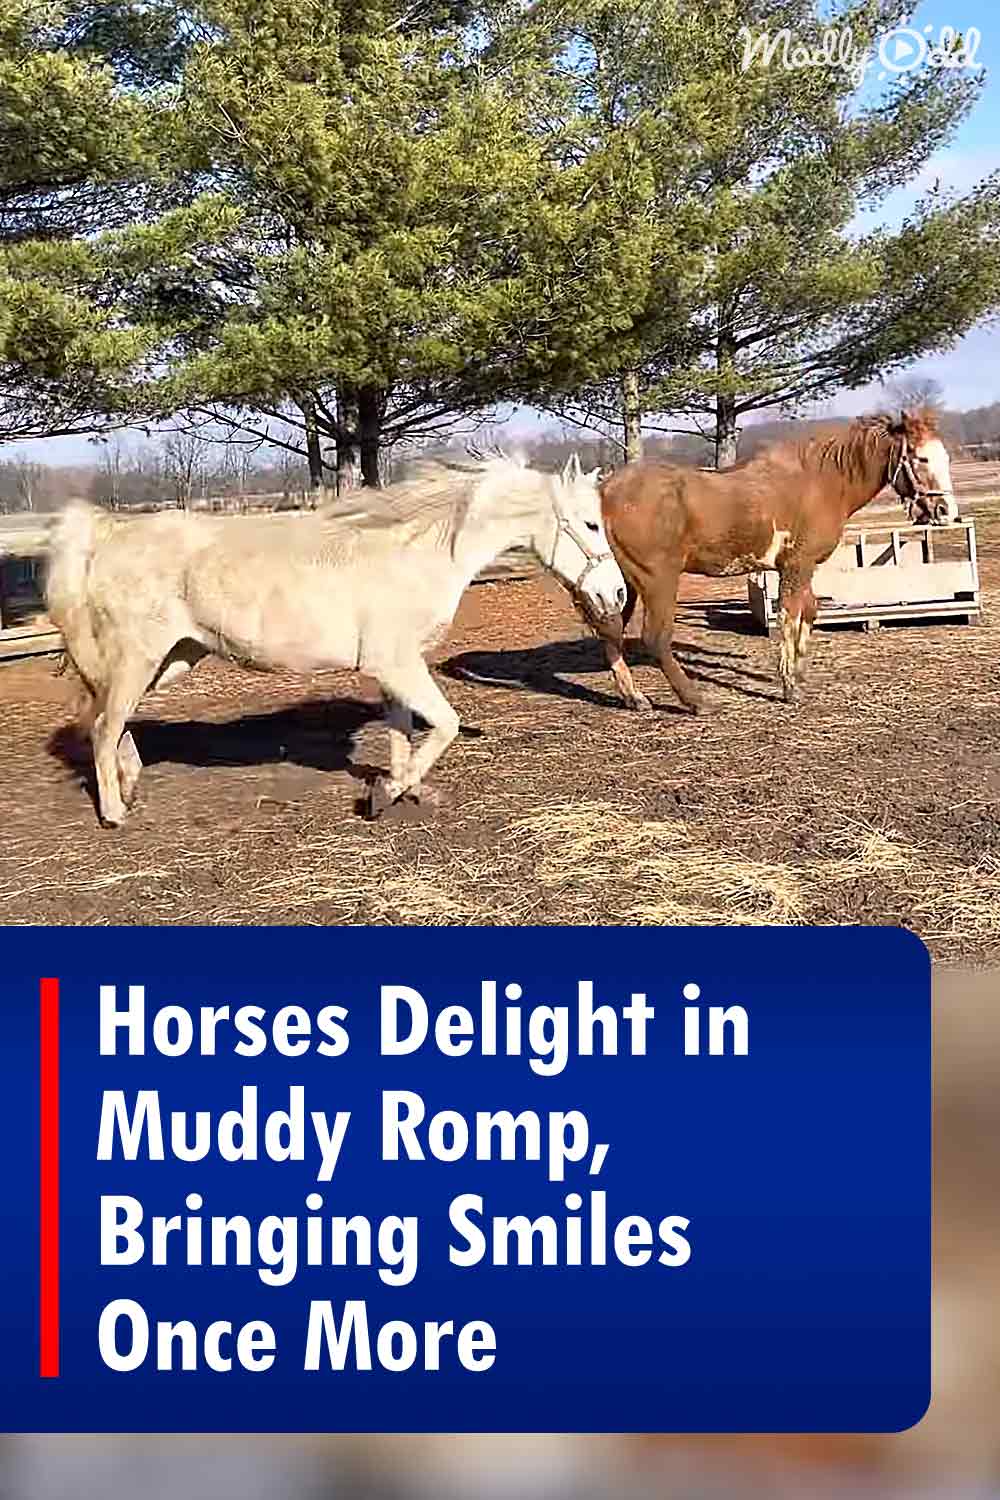 Horses Delight in Muddy Romp, Bringing Smiles Once More